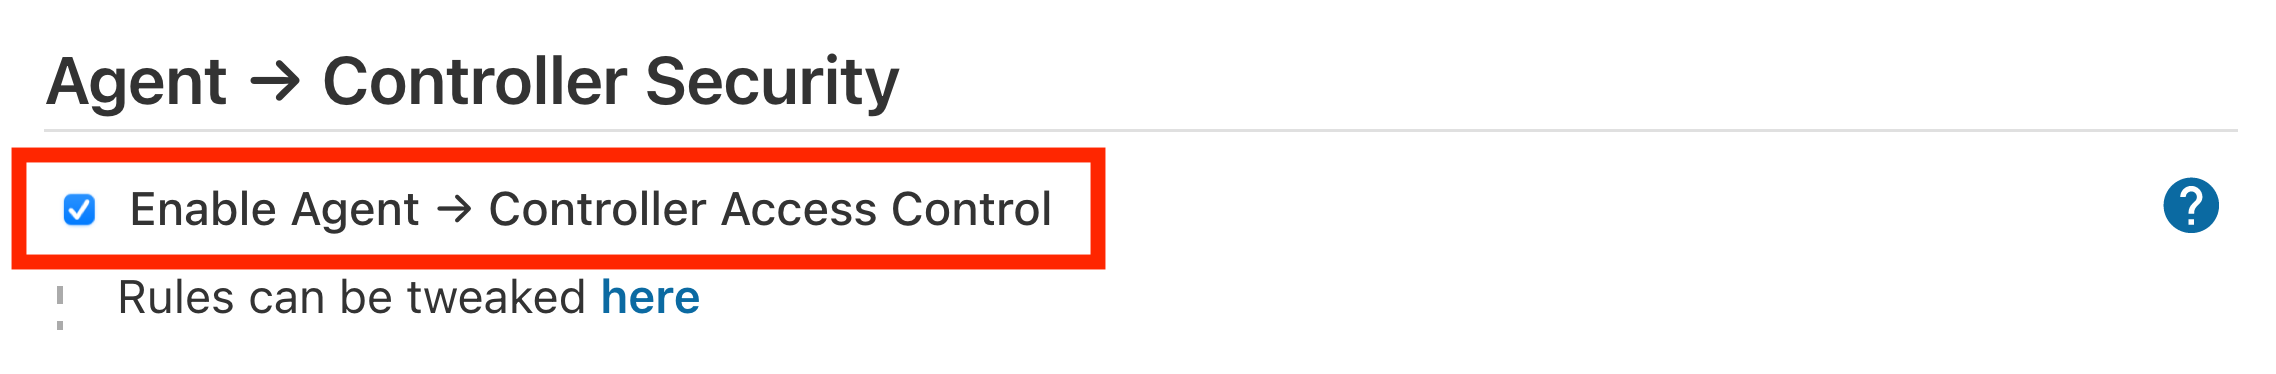 Security - Enable Agent ⇒ Controller Access Control